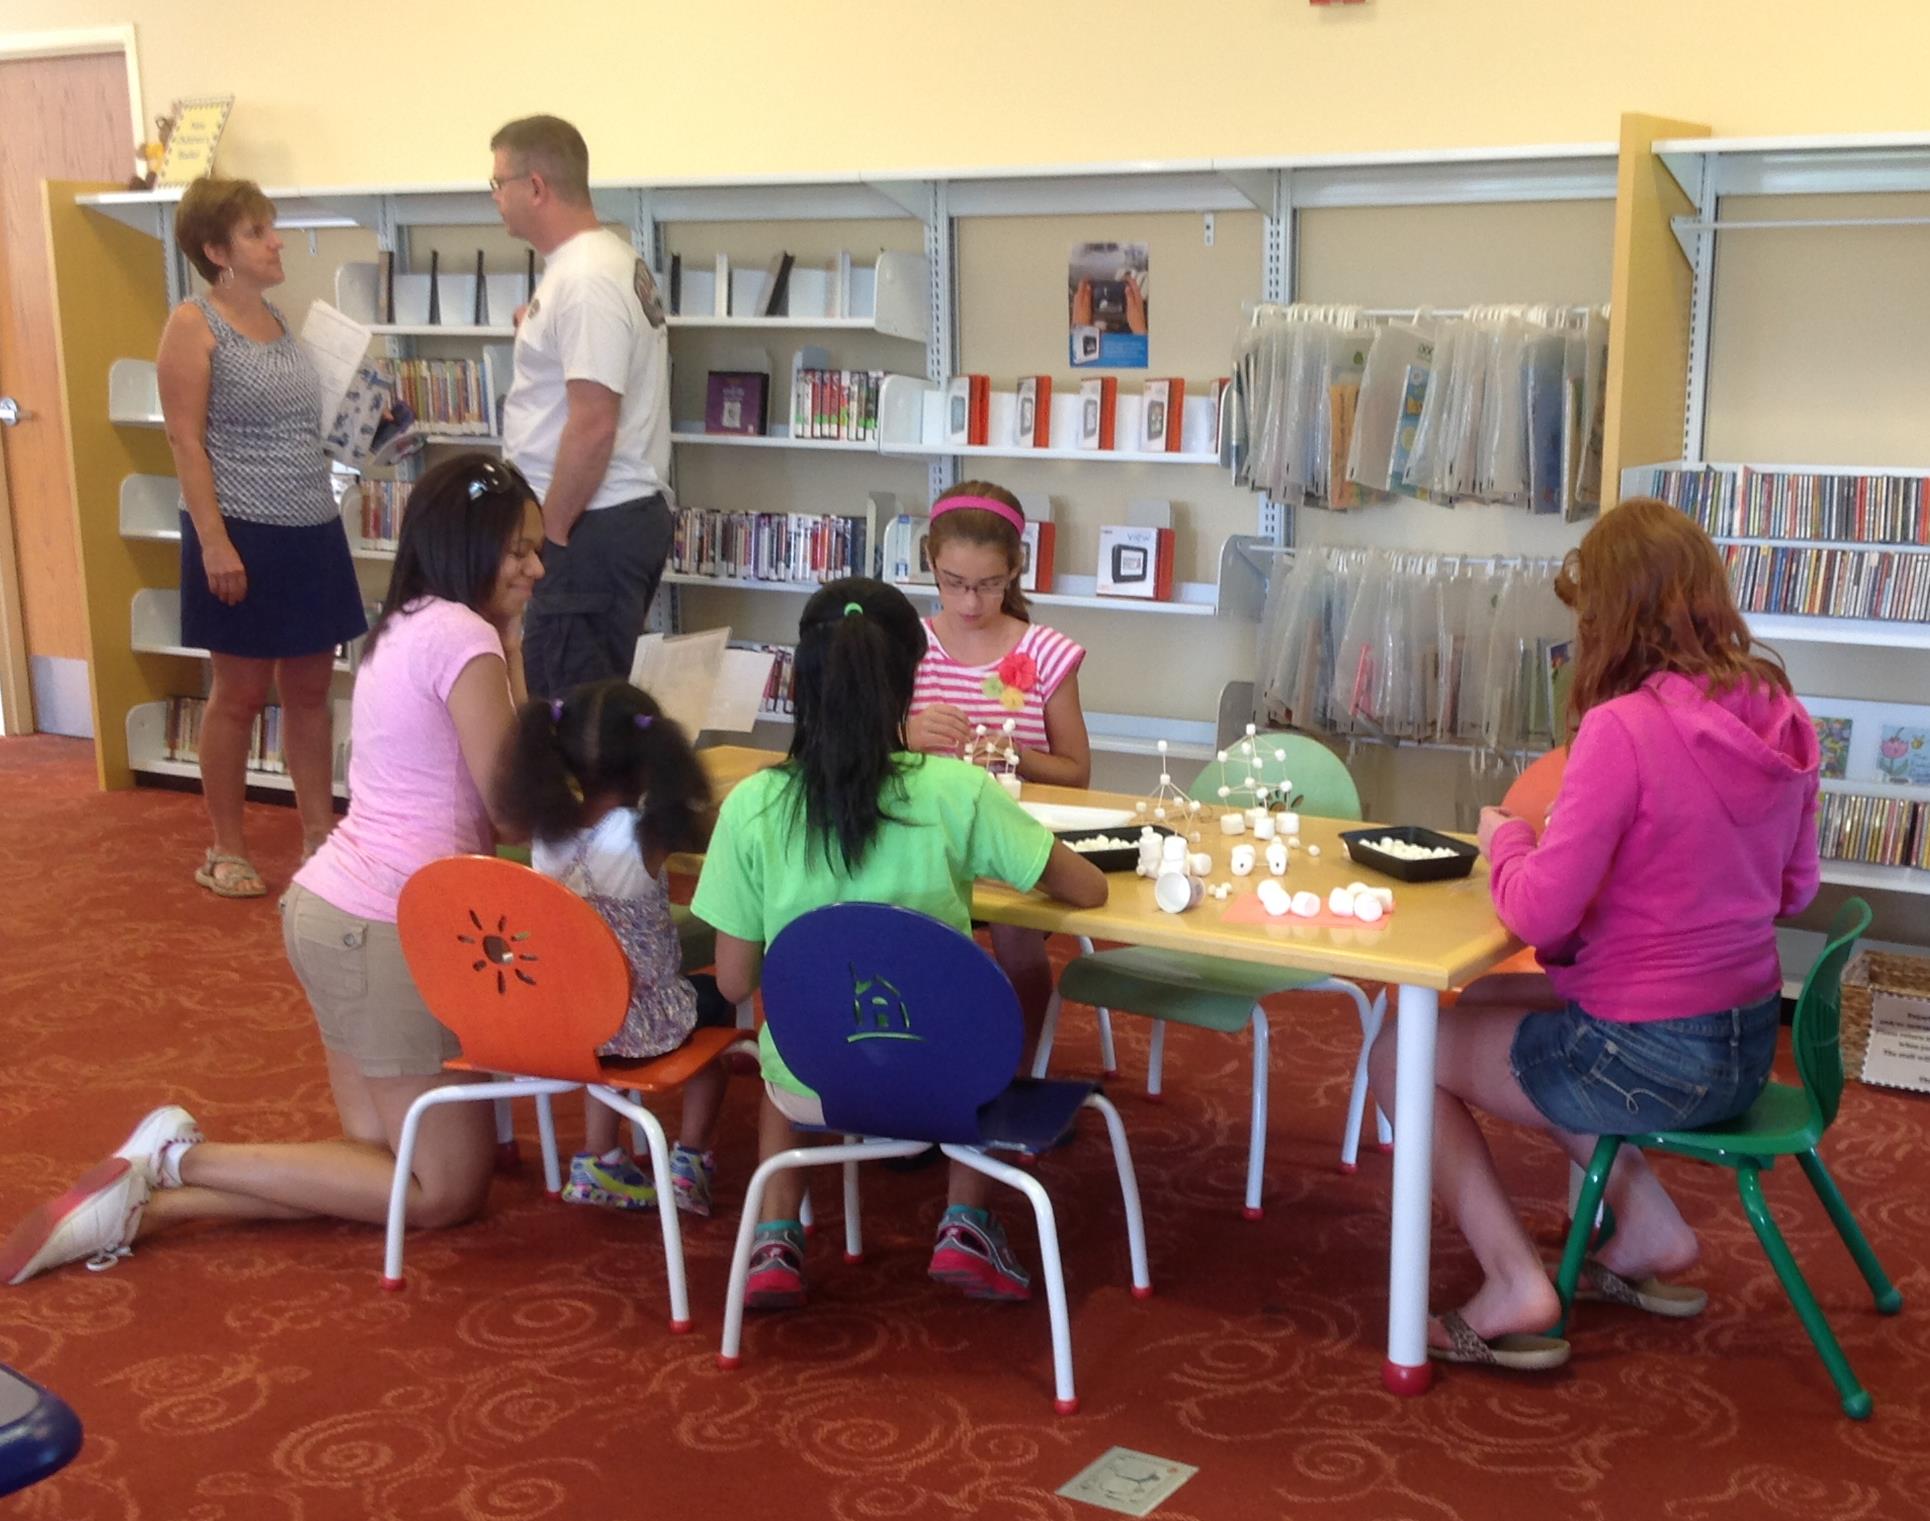 A recent Maker Fair at the  library  was hosted by the local 4-H chapter and involved kids in building structures using marshmallows and toothpicks.  Lots of fun was had and marshmallows eaten.